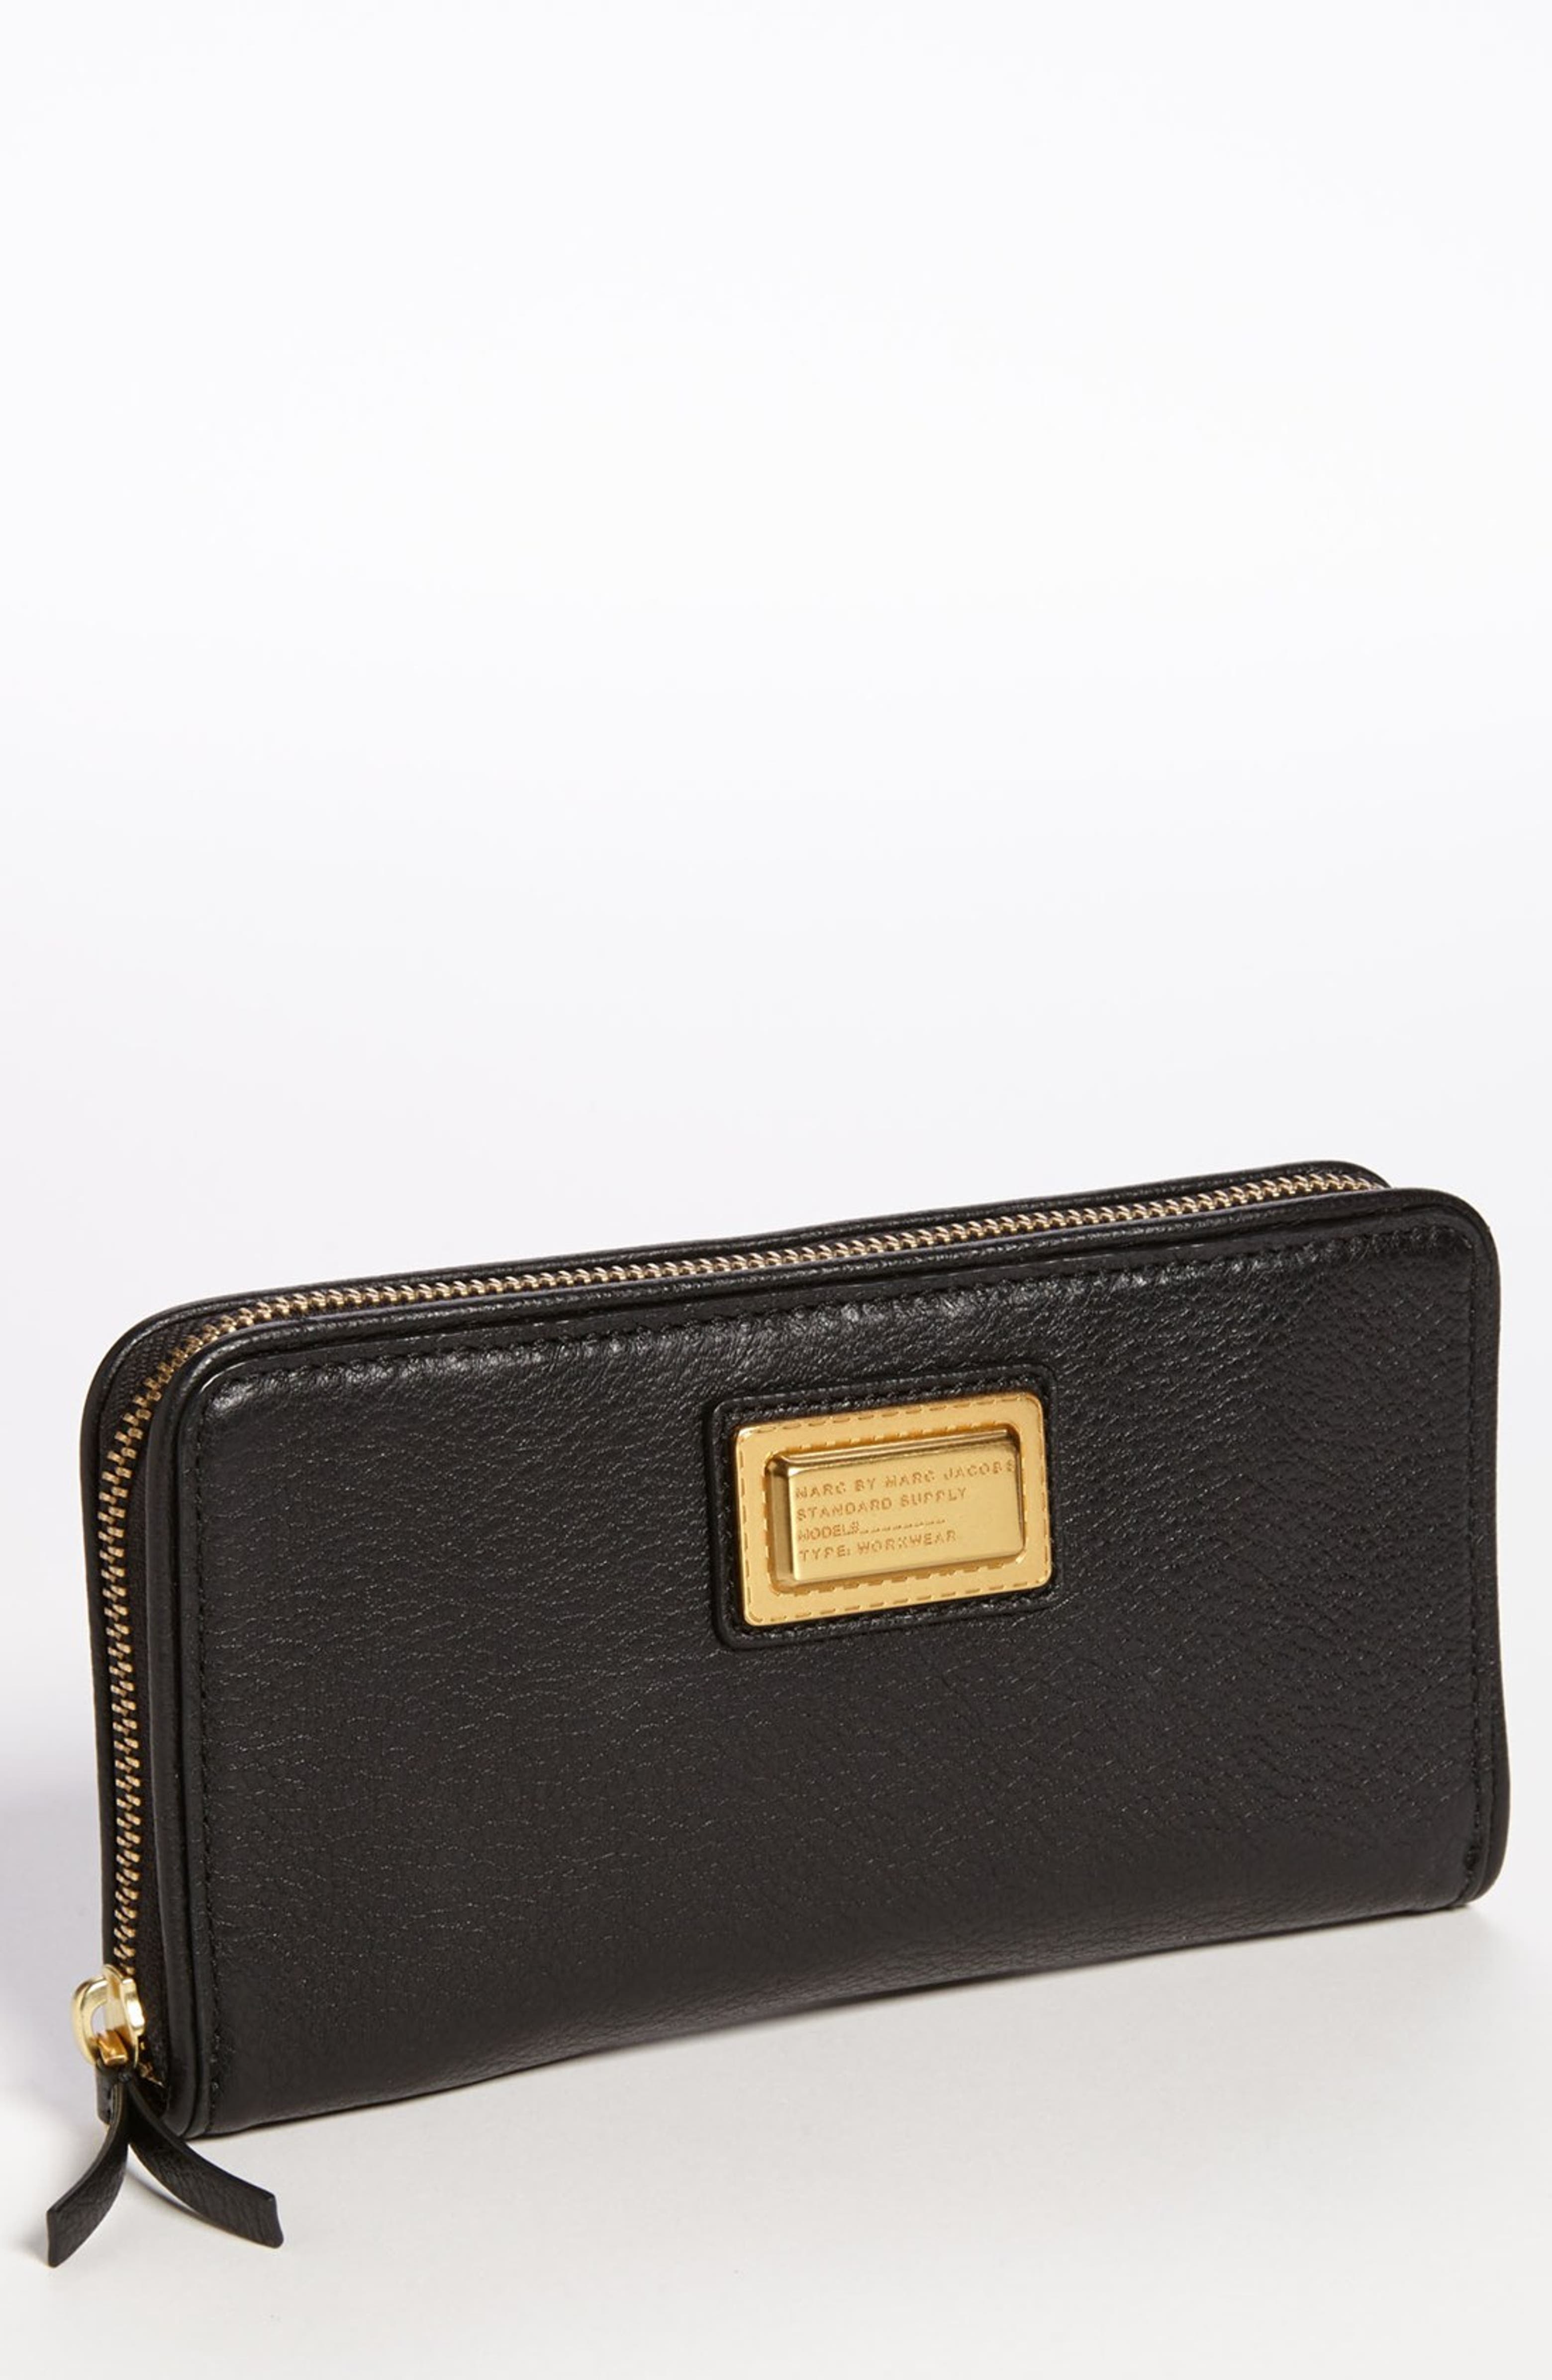 MARC BY MARC JACOBS 'Vertical Zippy' Leather Wallet | Nordstrom